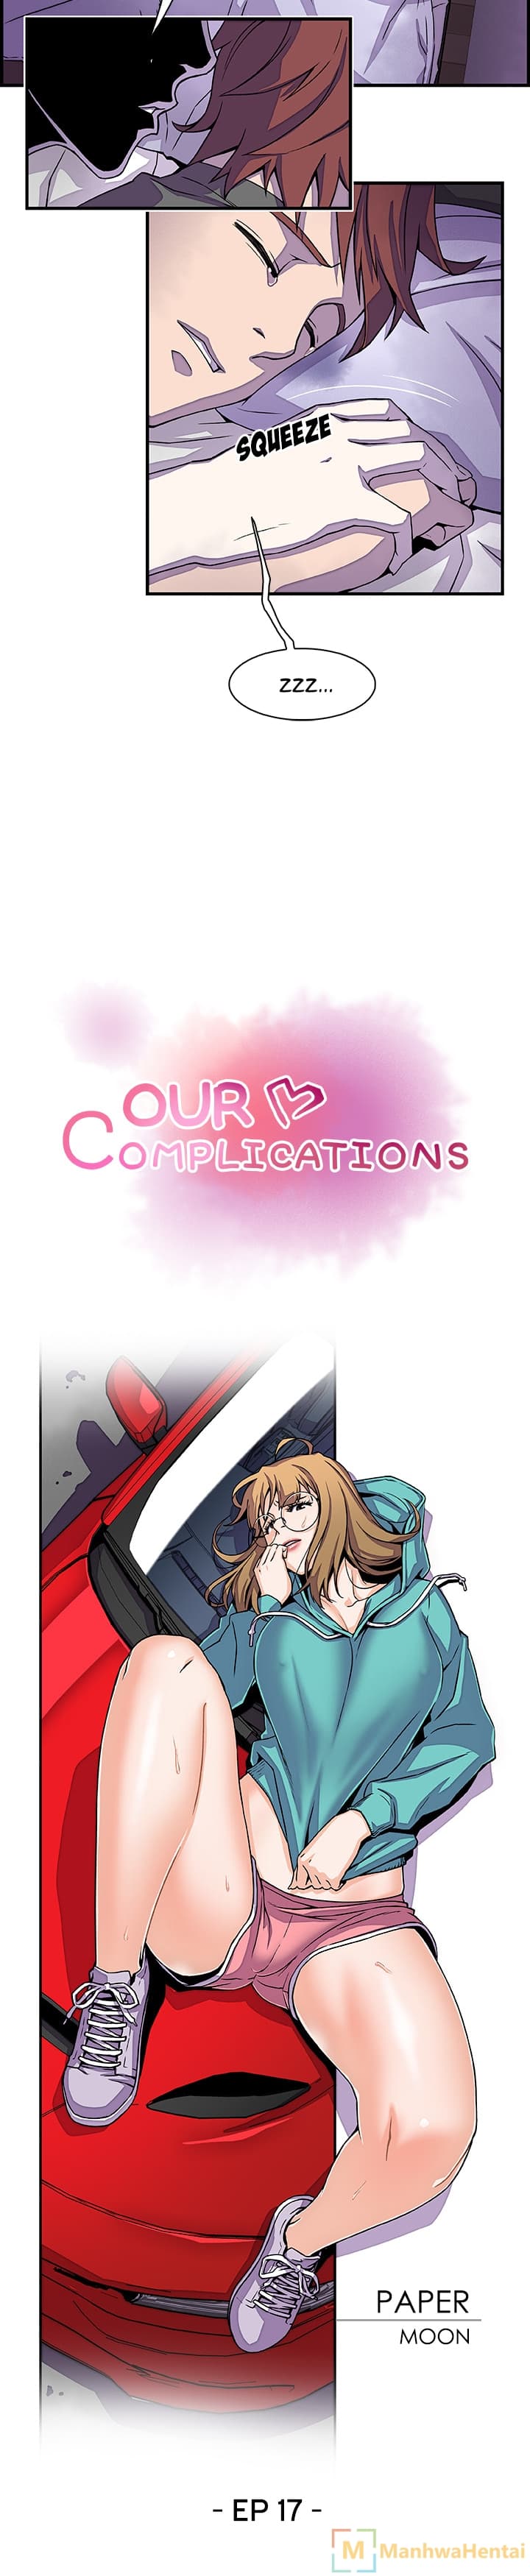 Our Complication - หน้า 2